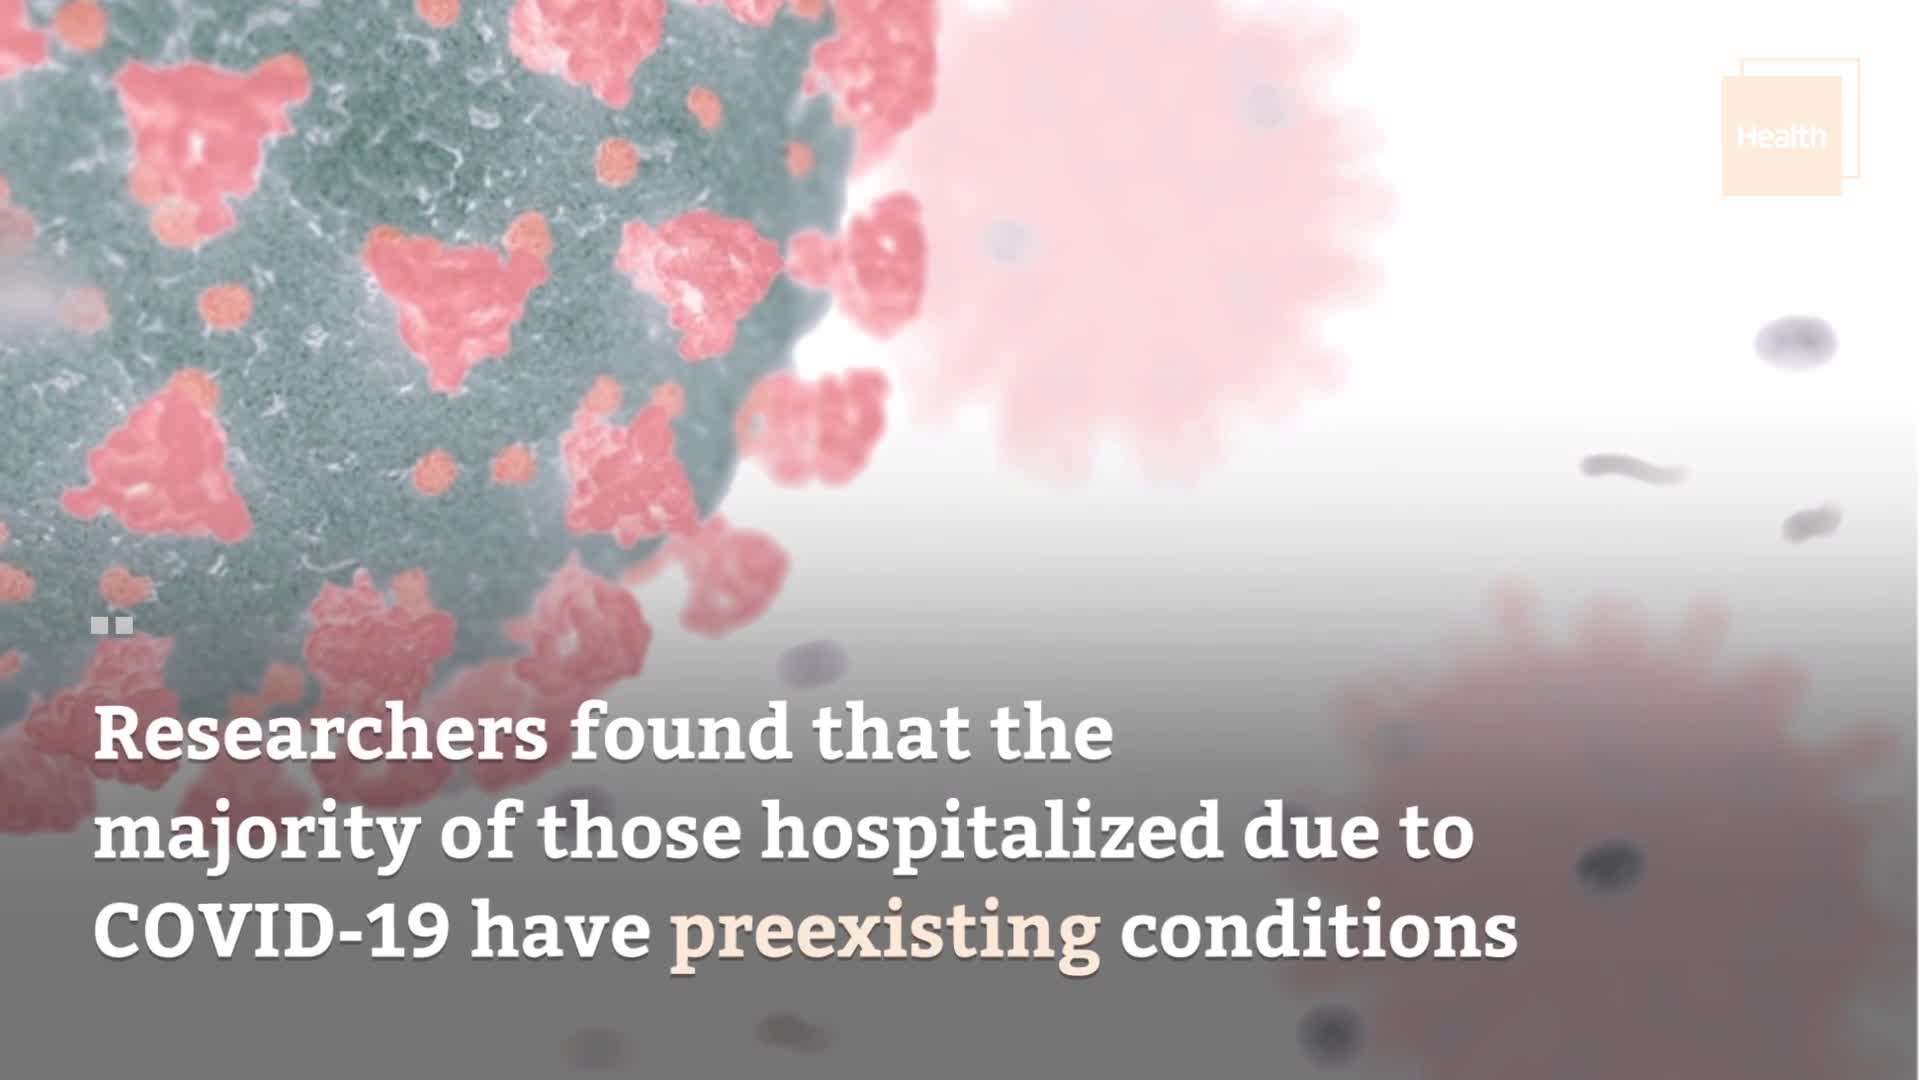 Nearly 90% of People Hospitalized for COVID-19 Have Underlying Conditions, Says CDC